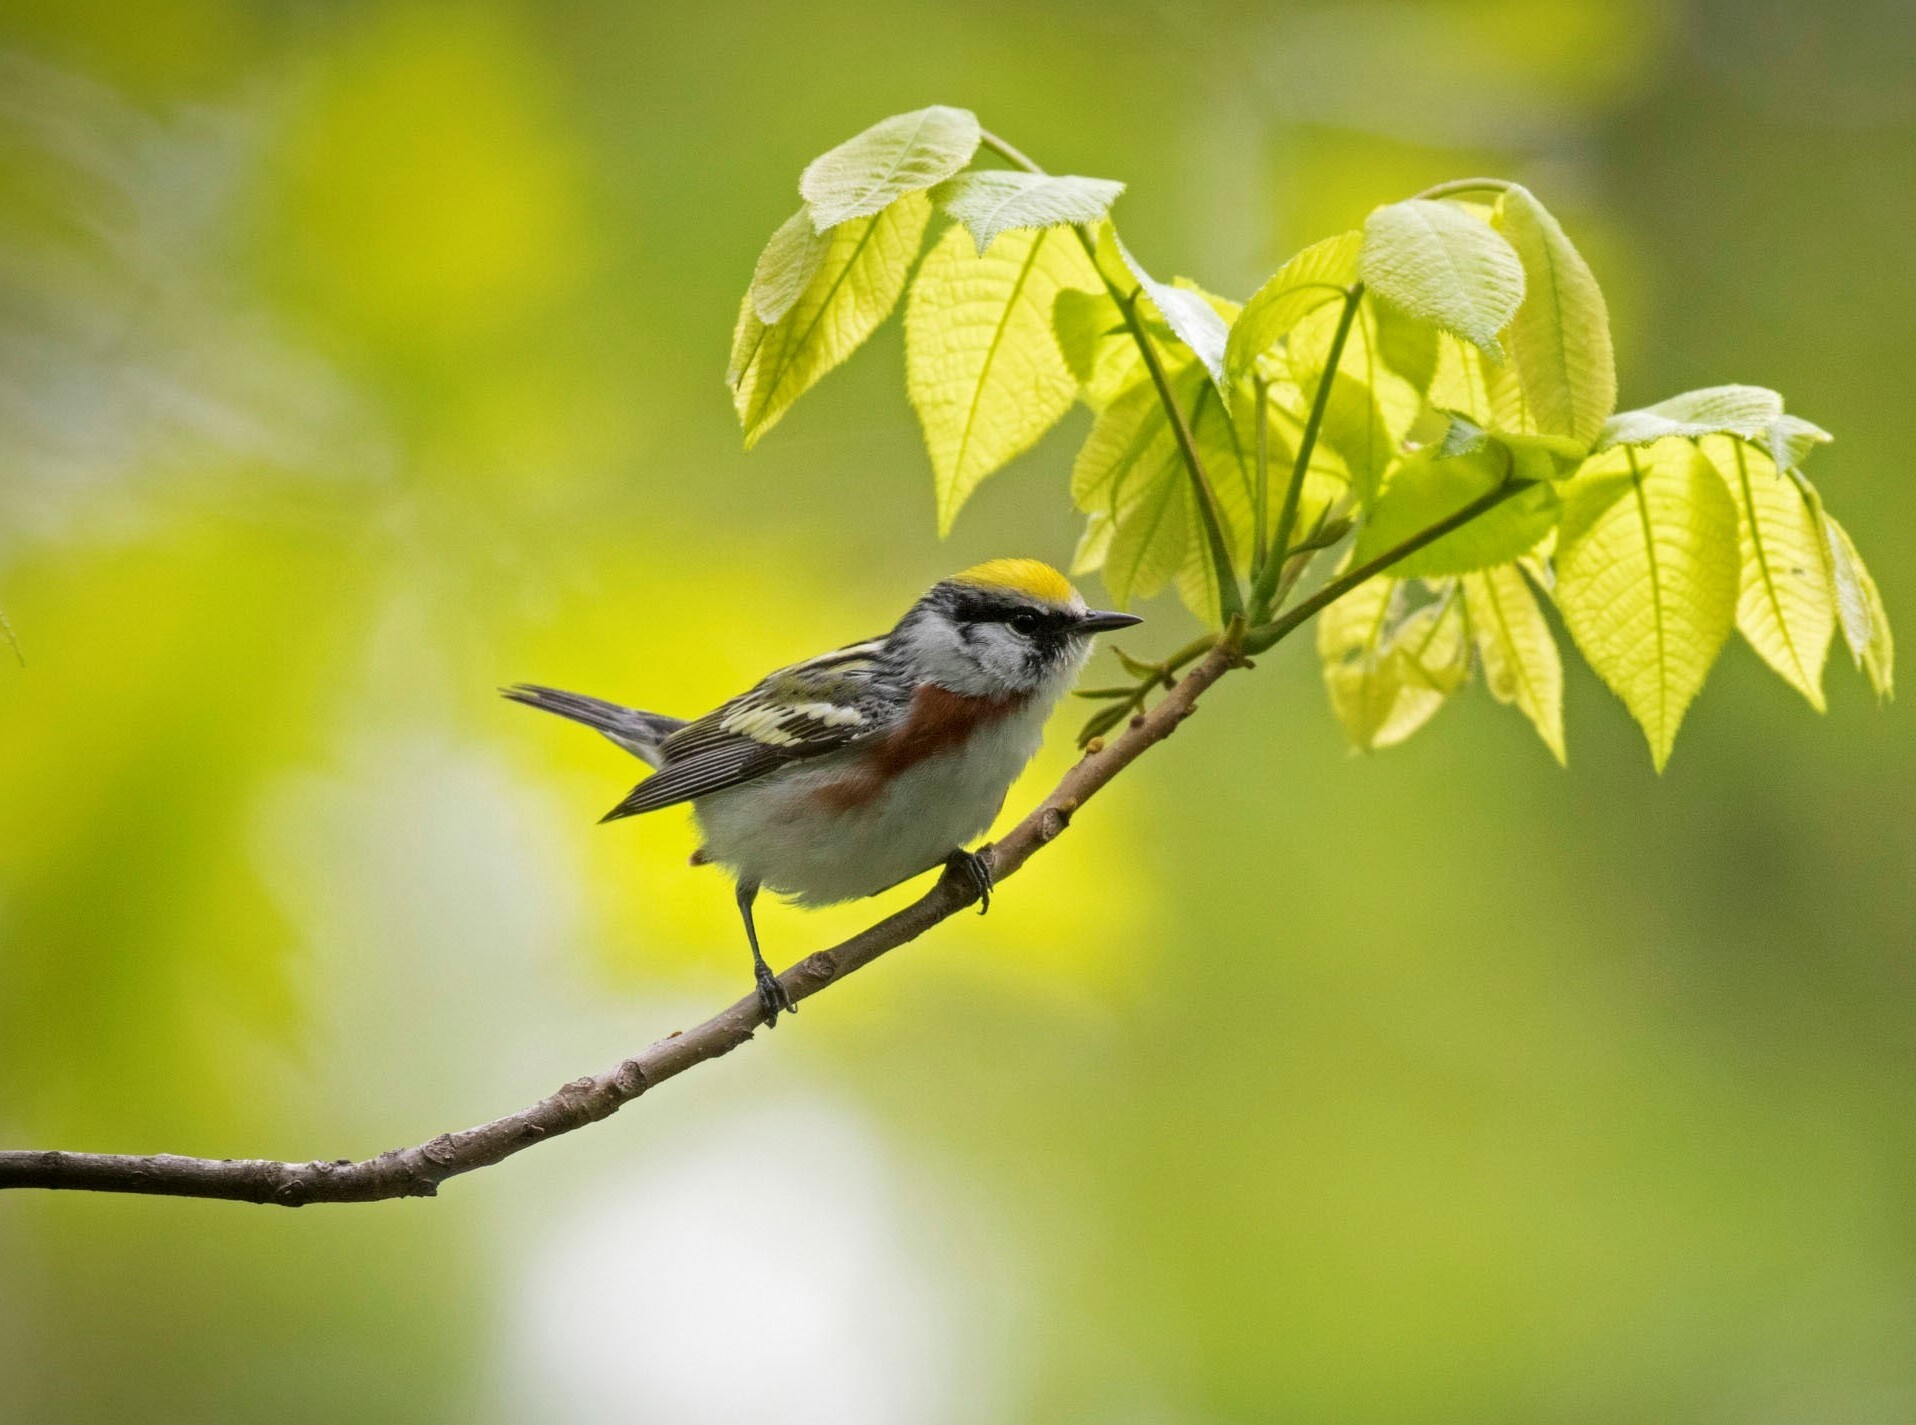 A surprising variety of species have been documented in green spaces along Hudson River Park, including over two dozen warbler species such as the Chestnut-sided Warbler. Photo: <a href="https://www.fotoportmann.com/" target="_blank">François Portmann</a>